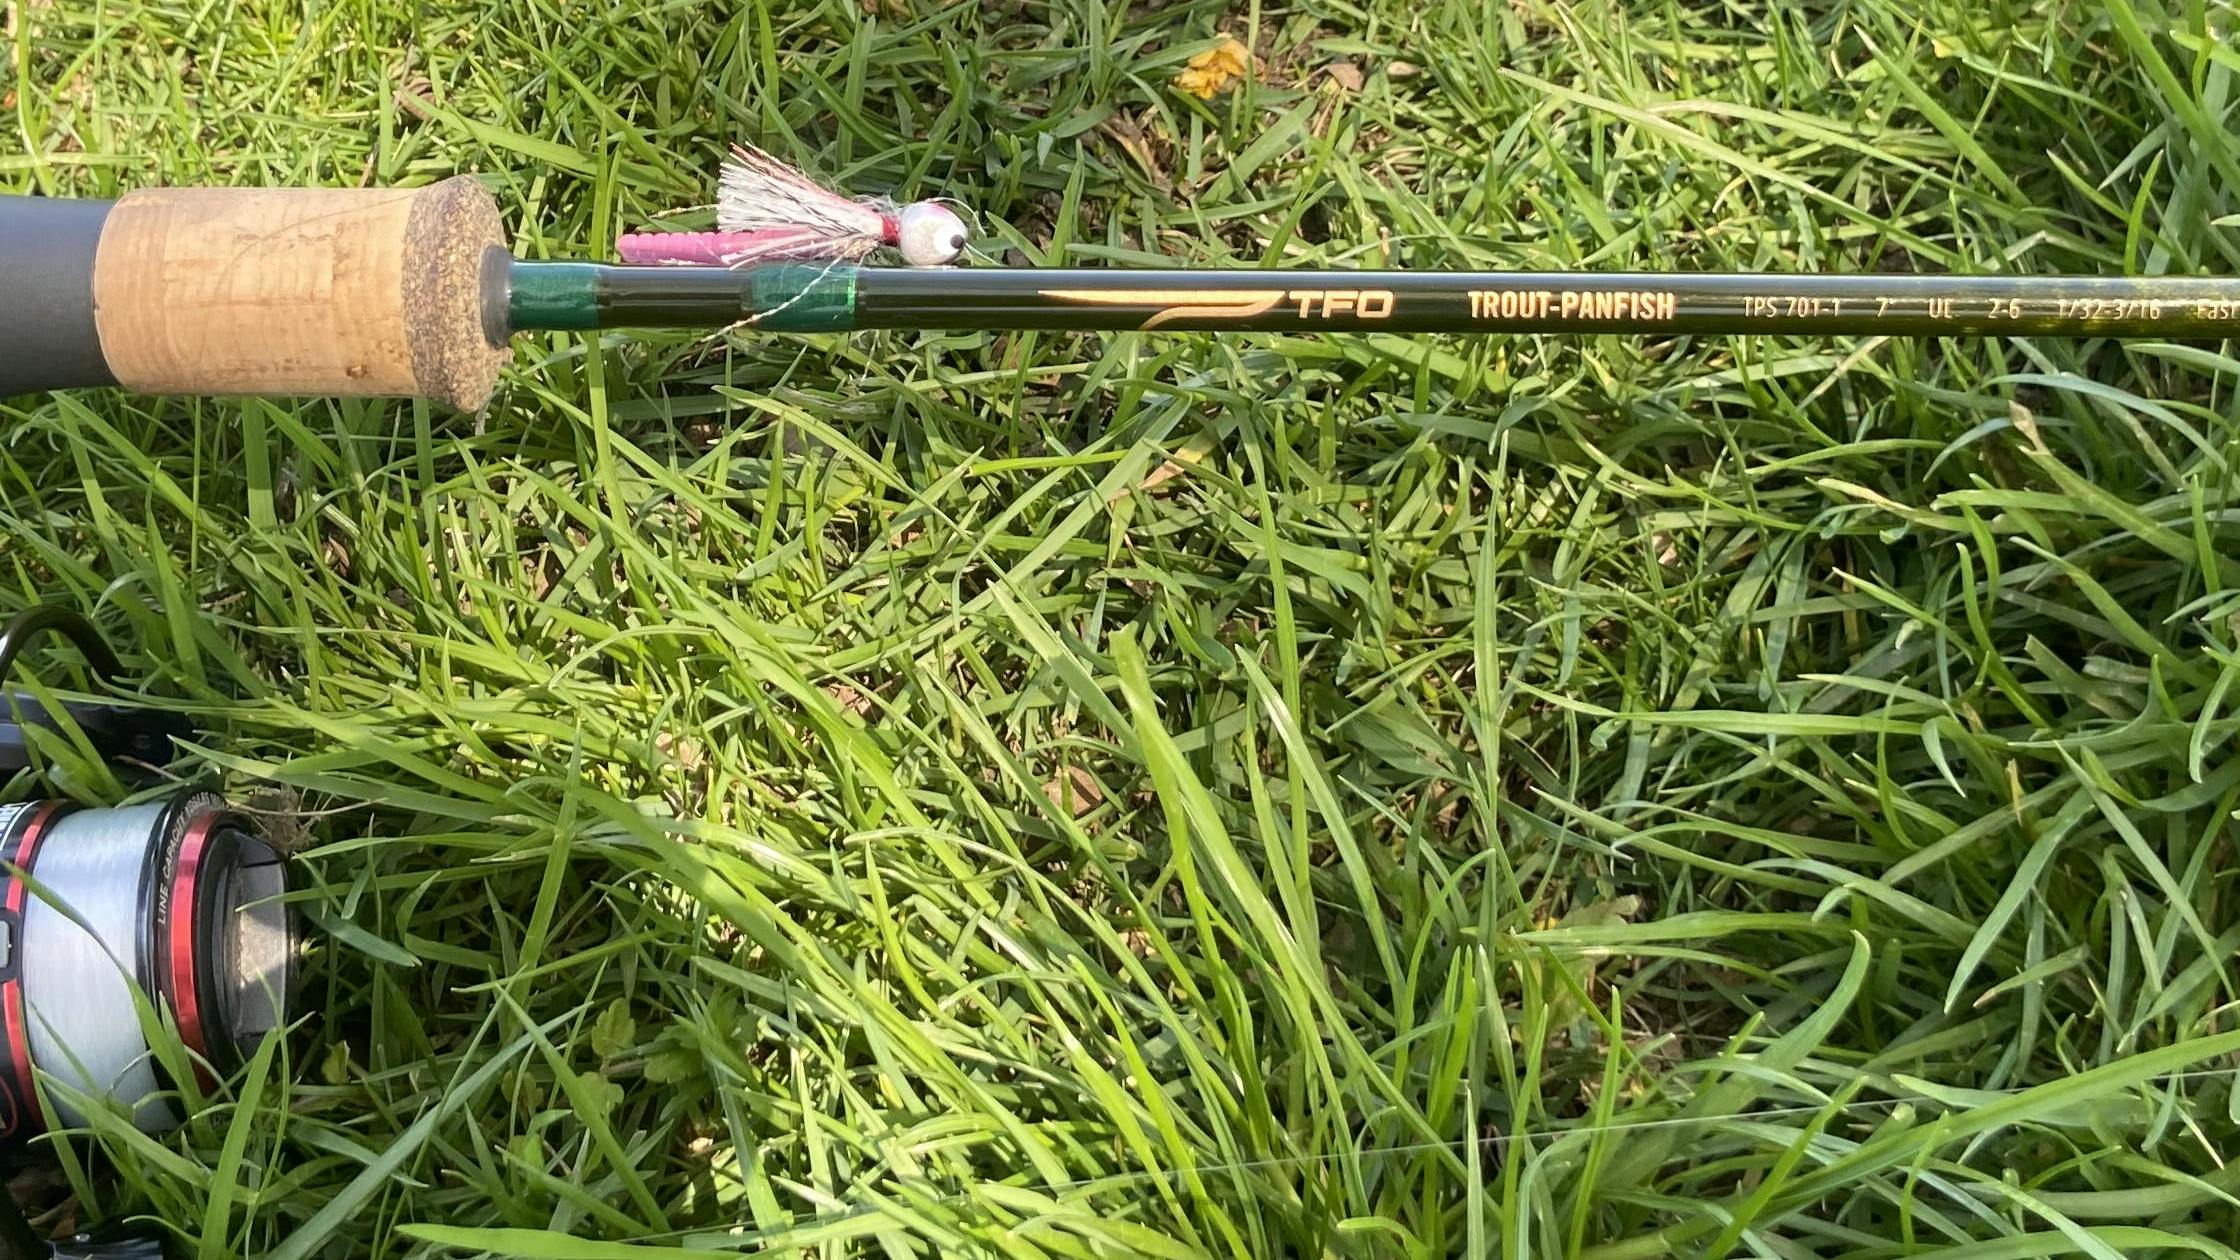 The Temple Fork Outfitters Trout-Panfish Rod lies in the grass.